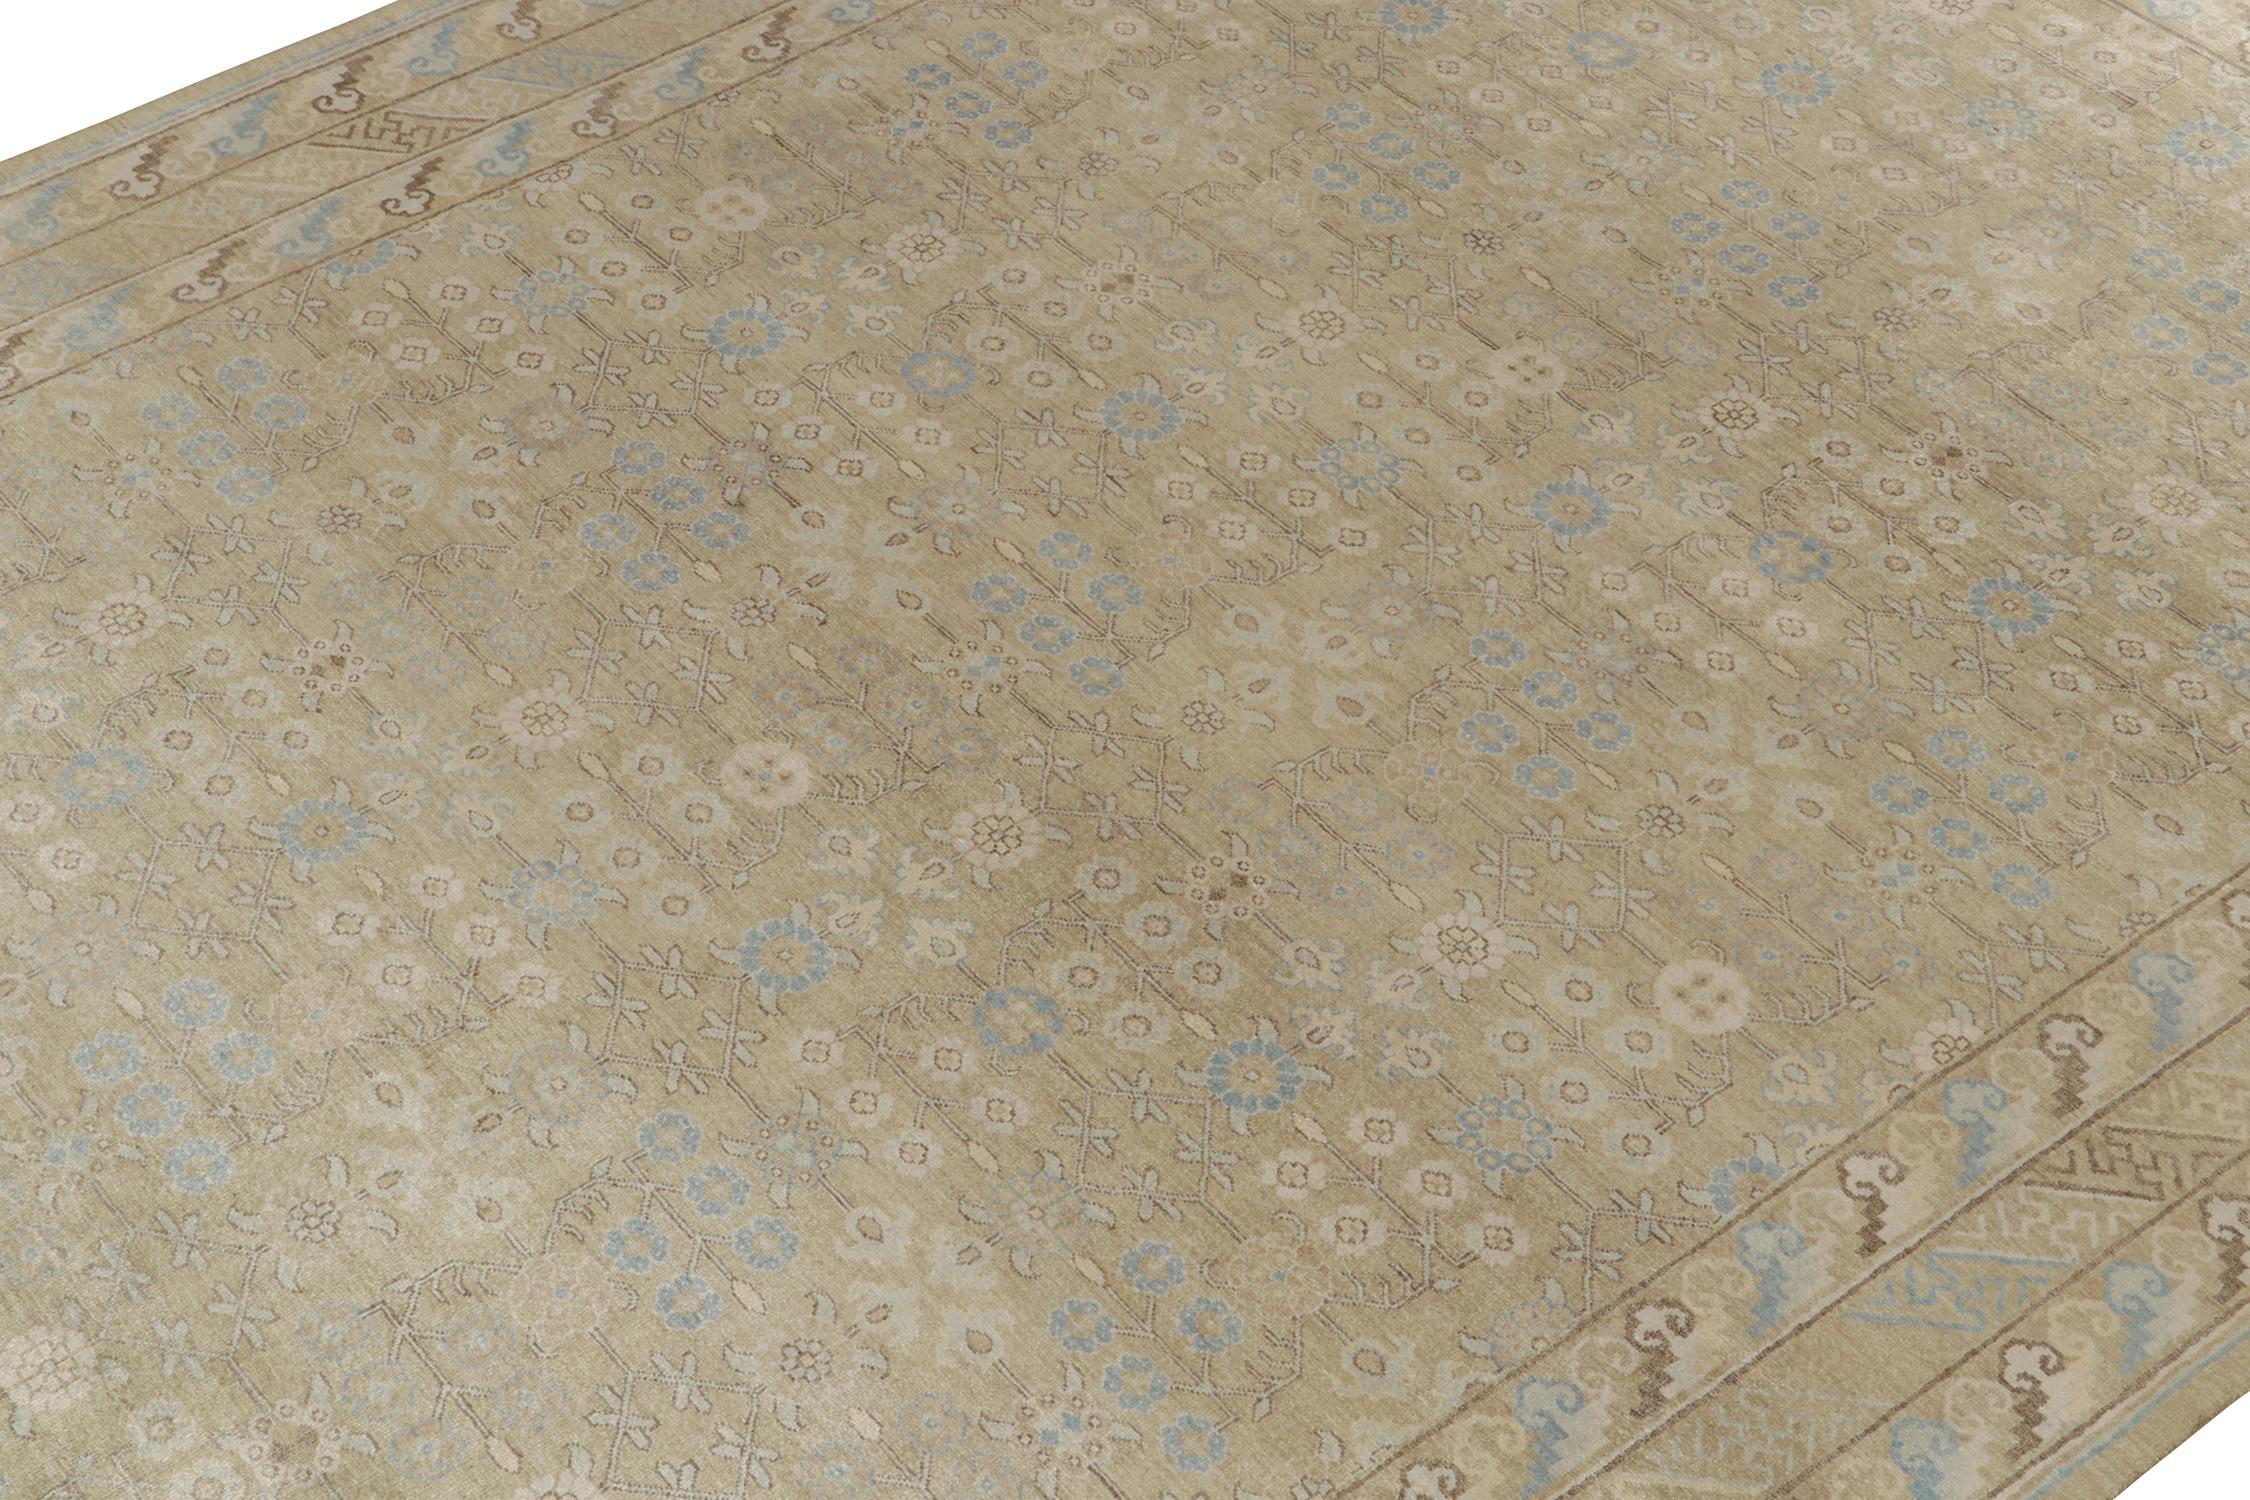 Hand-Knotted Rug & Kilim’s Khotan Style Rug in Gold, Beige-Brown and Blue Patterns For Sale